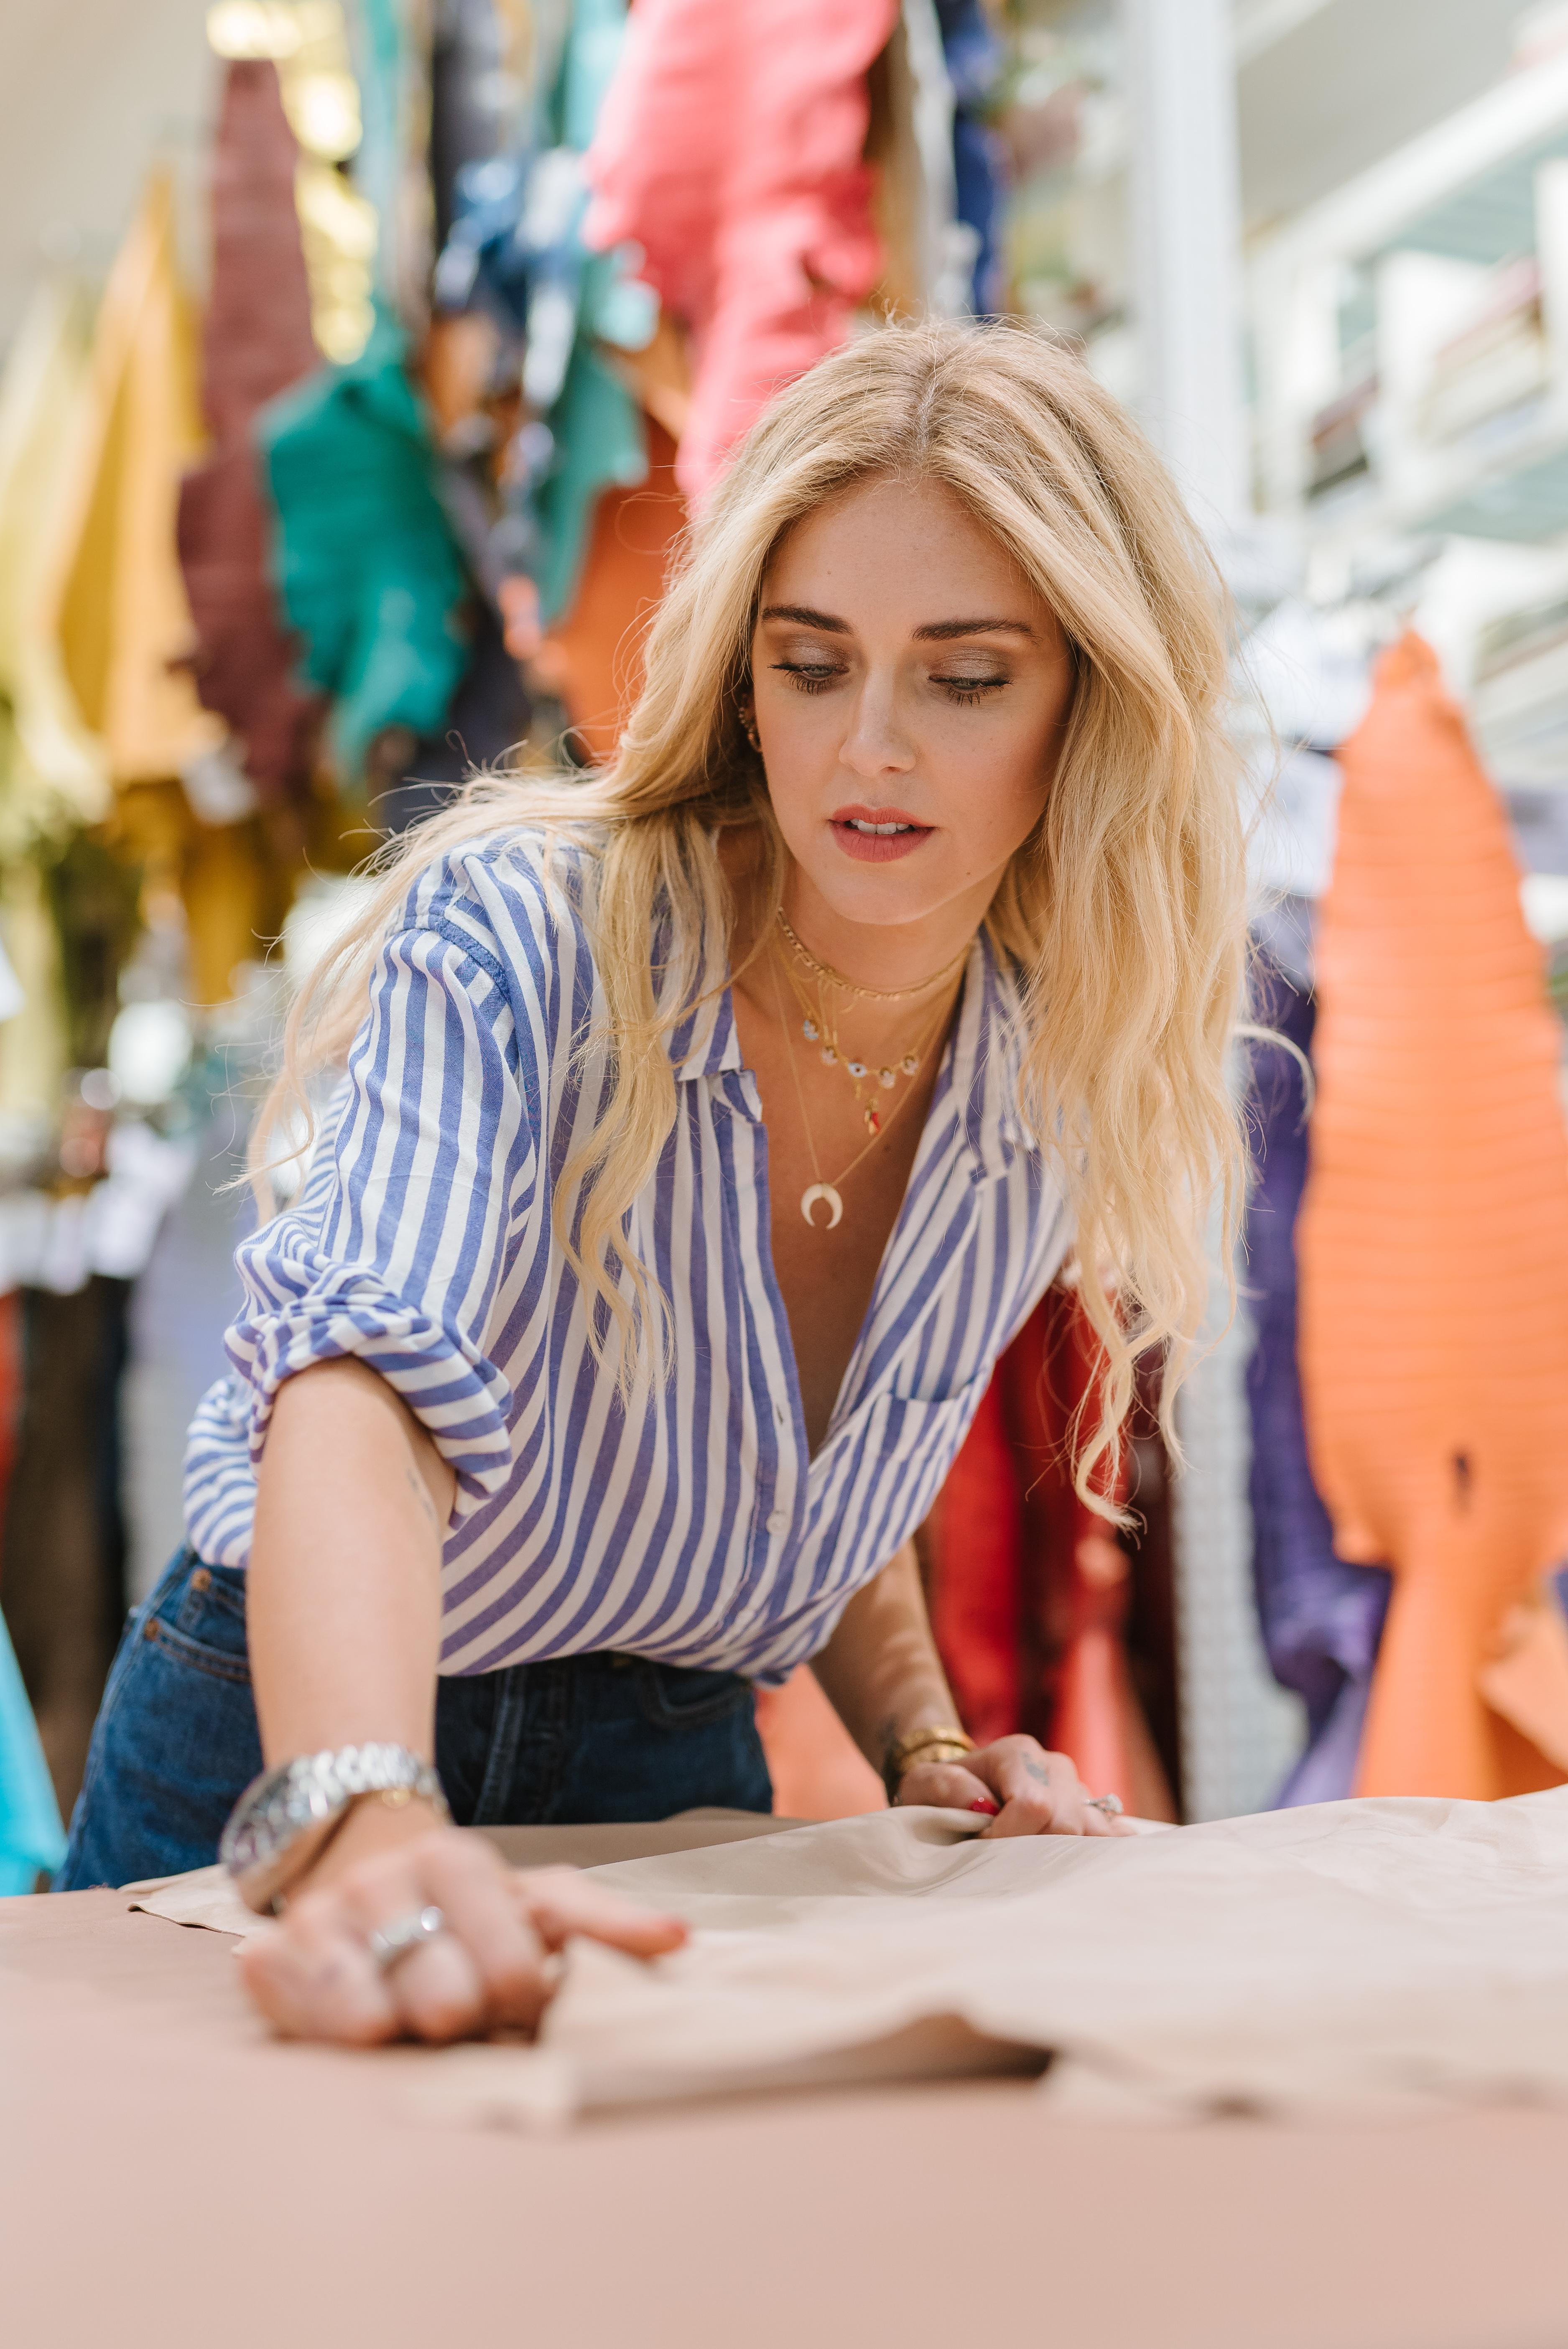 Tod's Launches New Collaboration with Chiara Ferragni - Daily Front Row